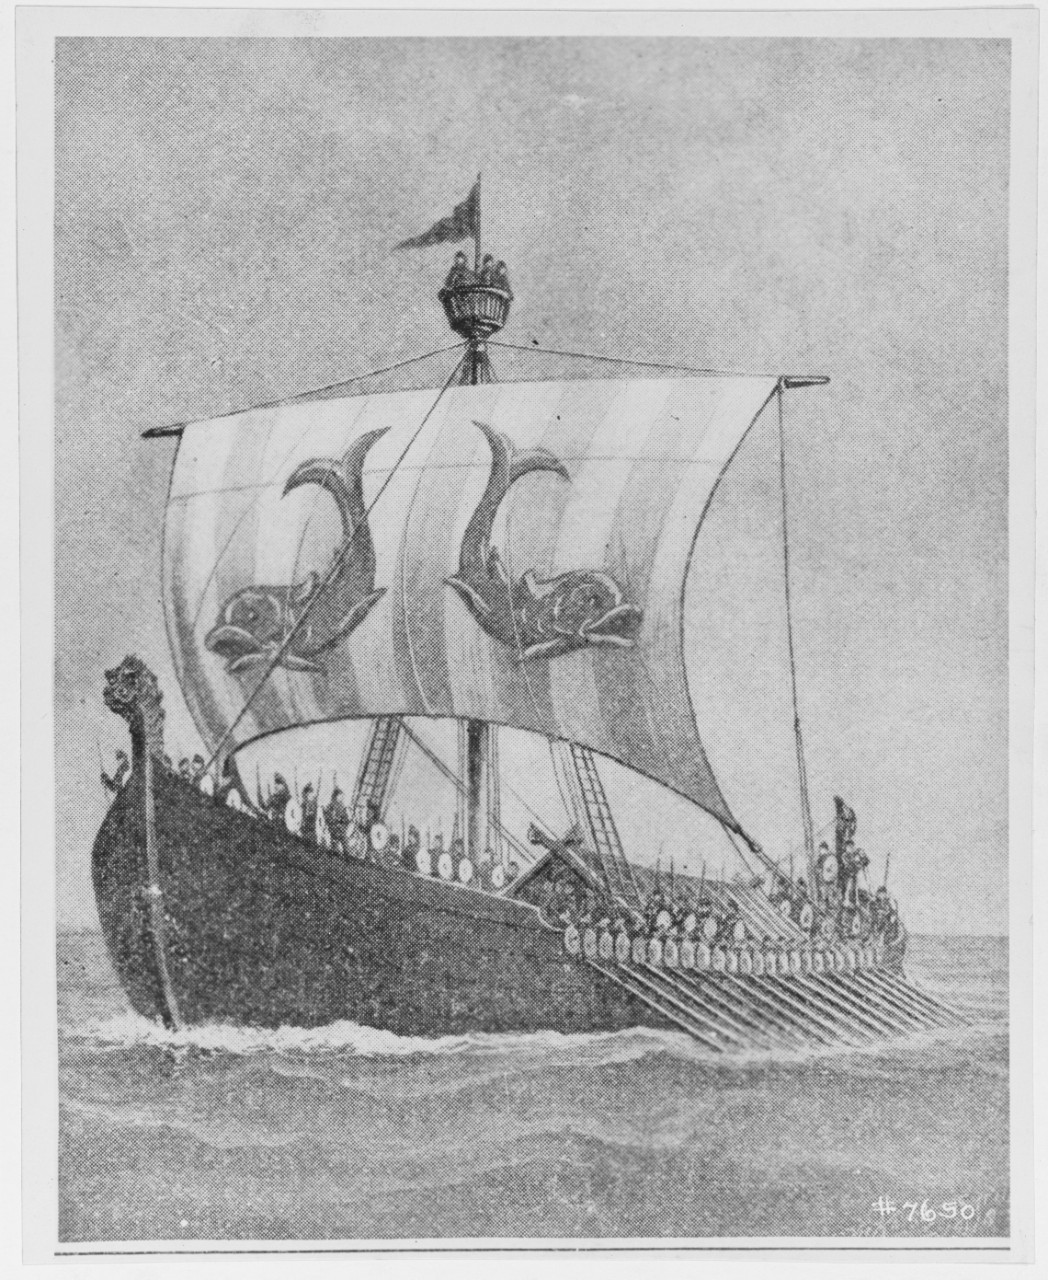 NH 112036 Typical Roman Trireme of the Punic Wars. C&R, 1926